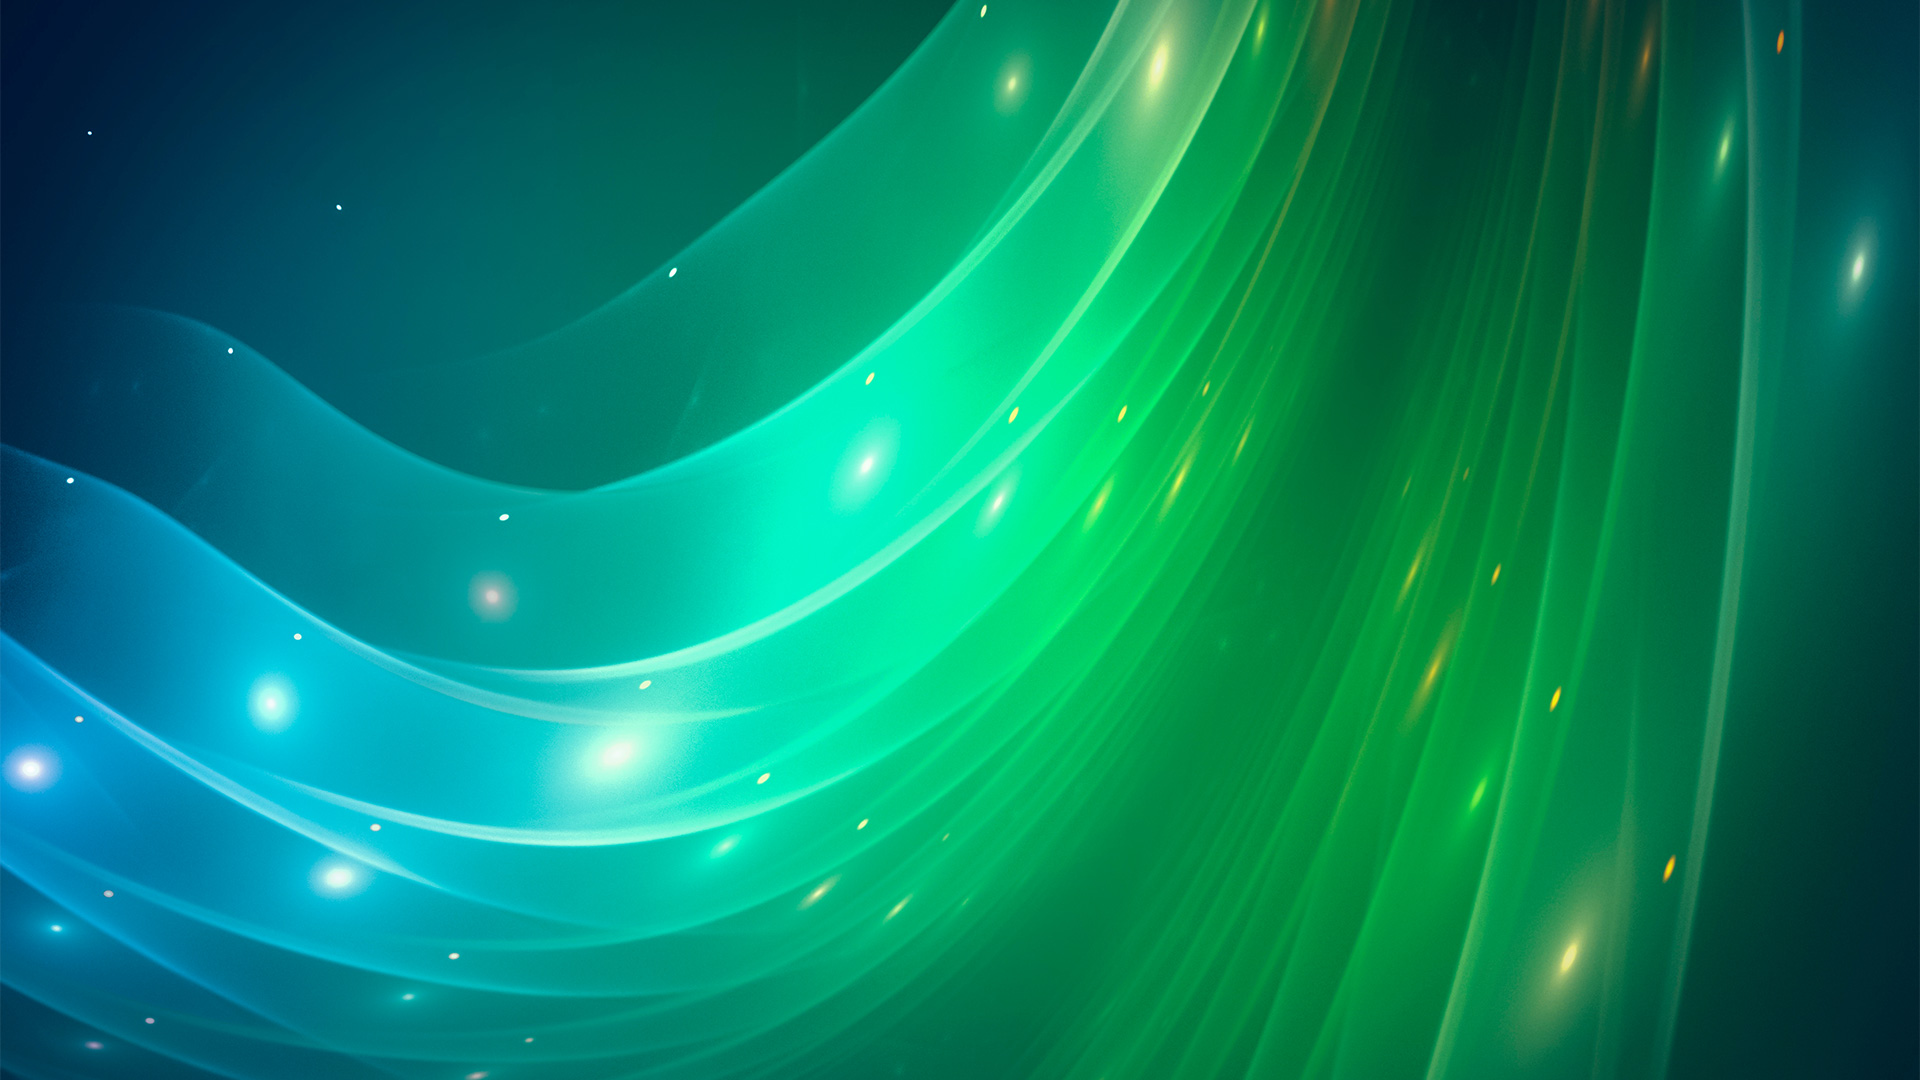 Abstract dark blue and green background